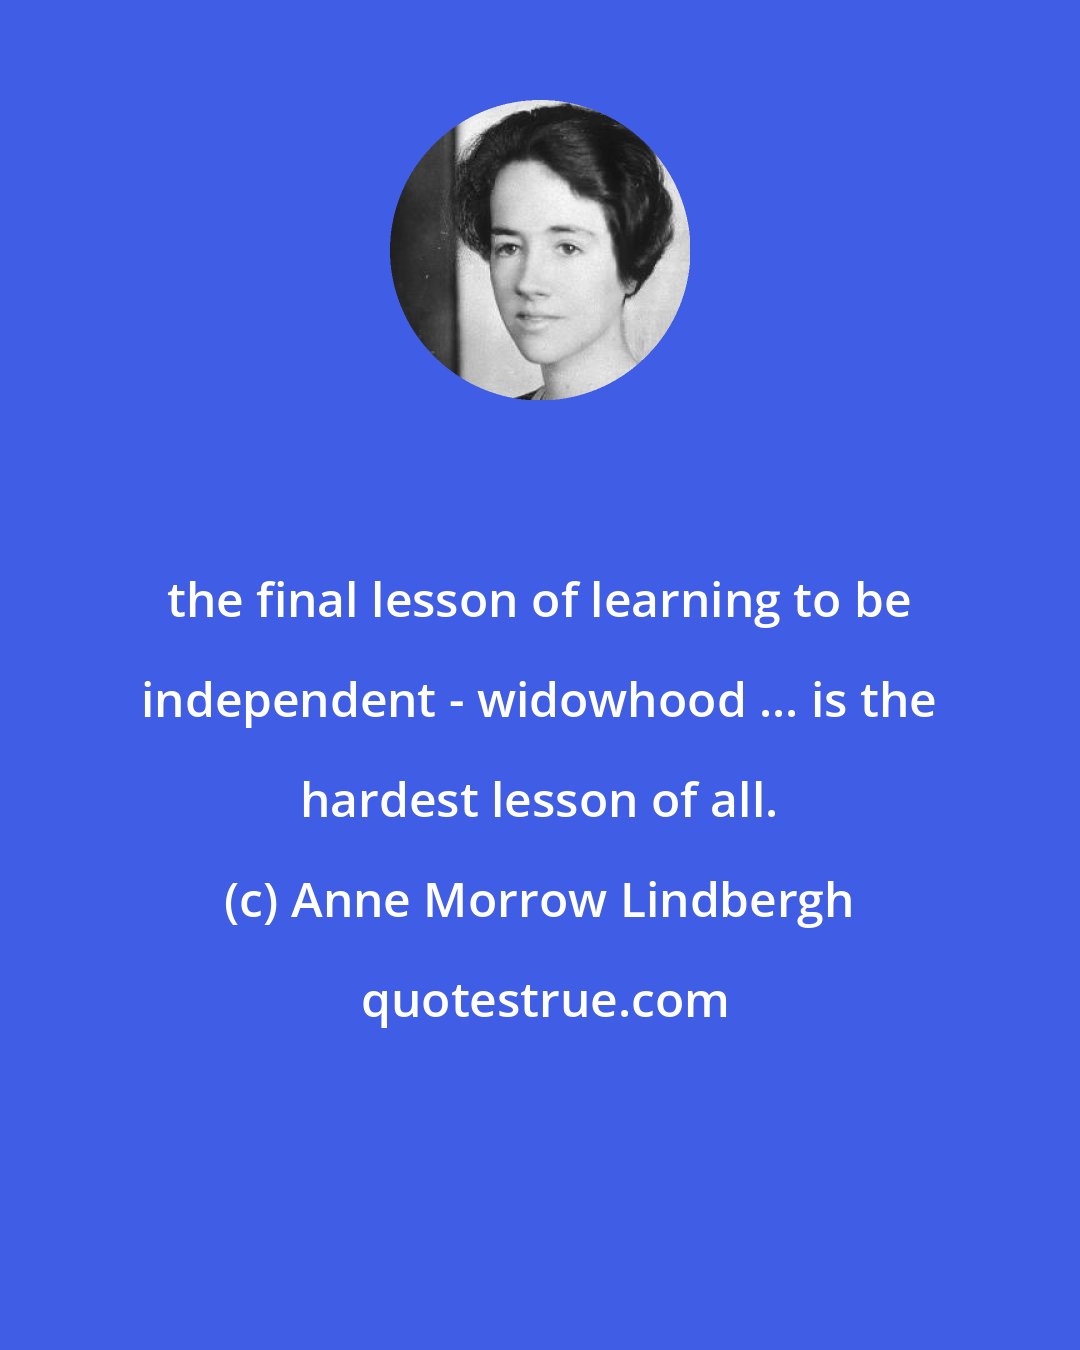 Anne Morrow Lindbergh: the final lesson of learning to be independent - widowhood ... is the hardest lesson of all.